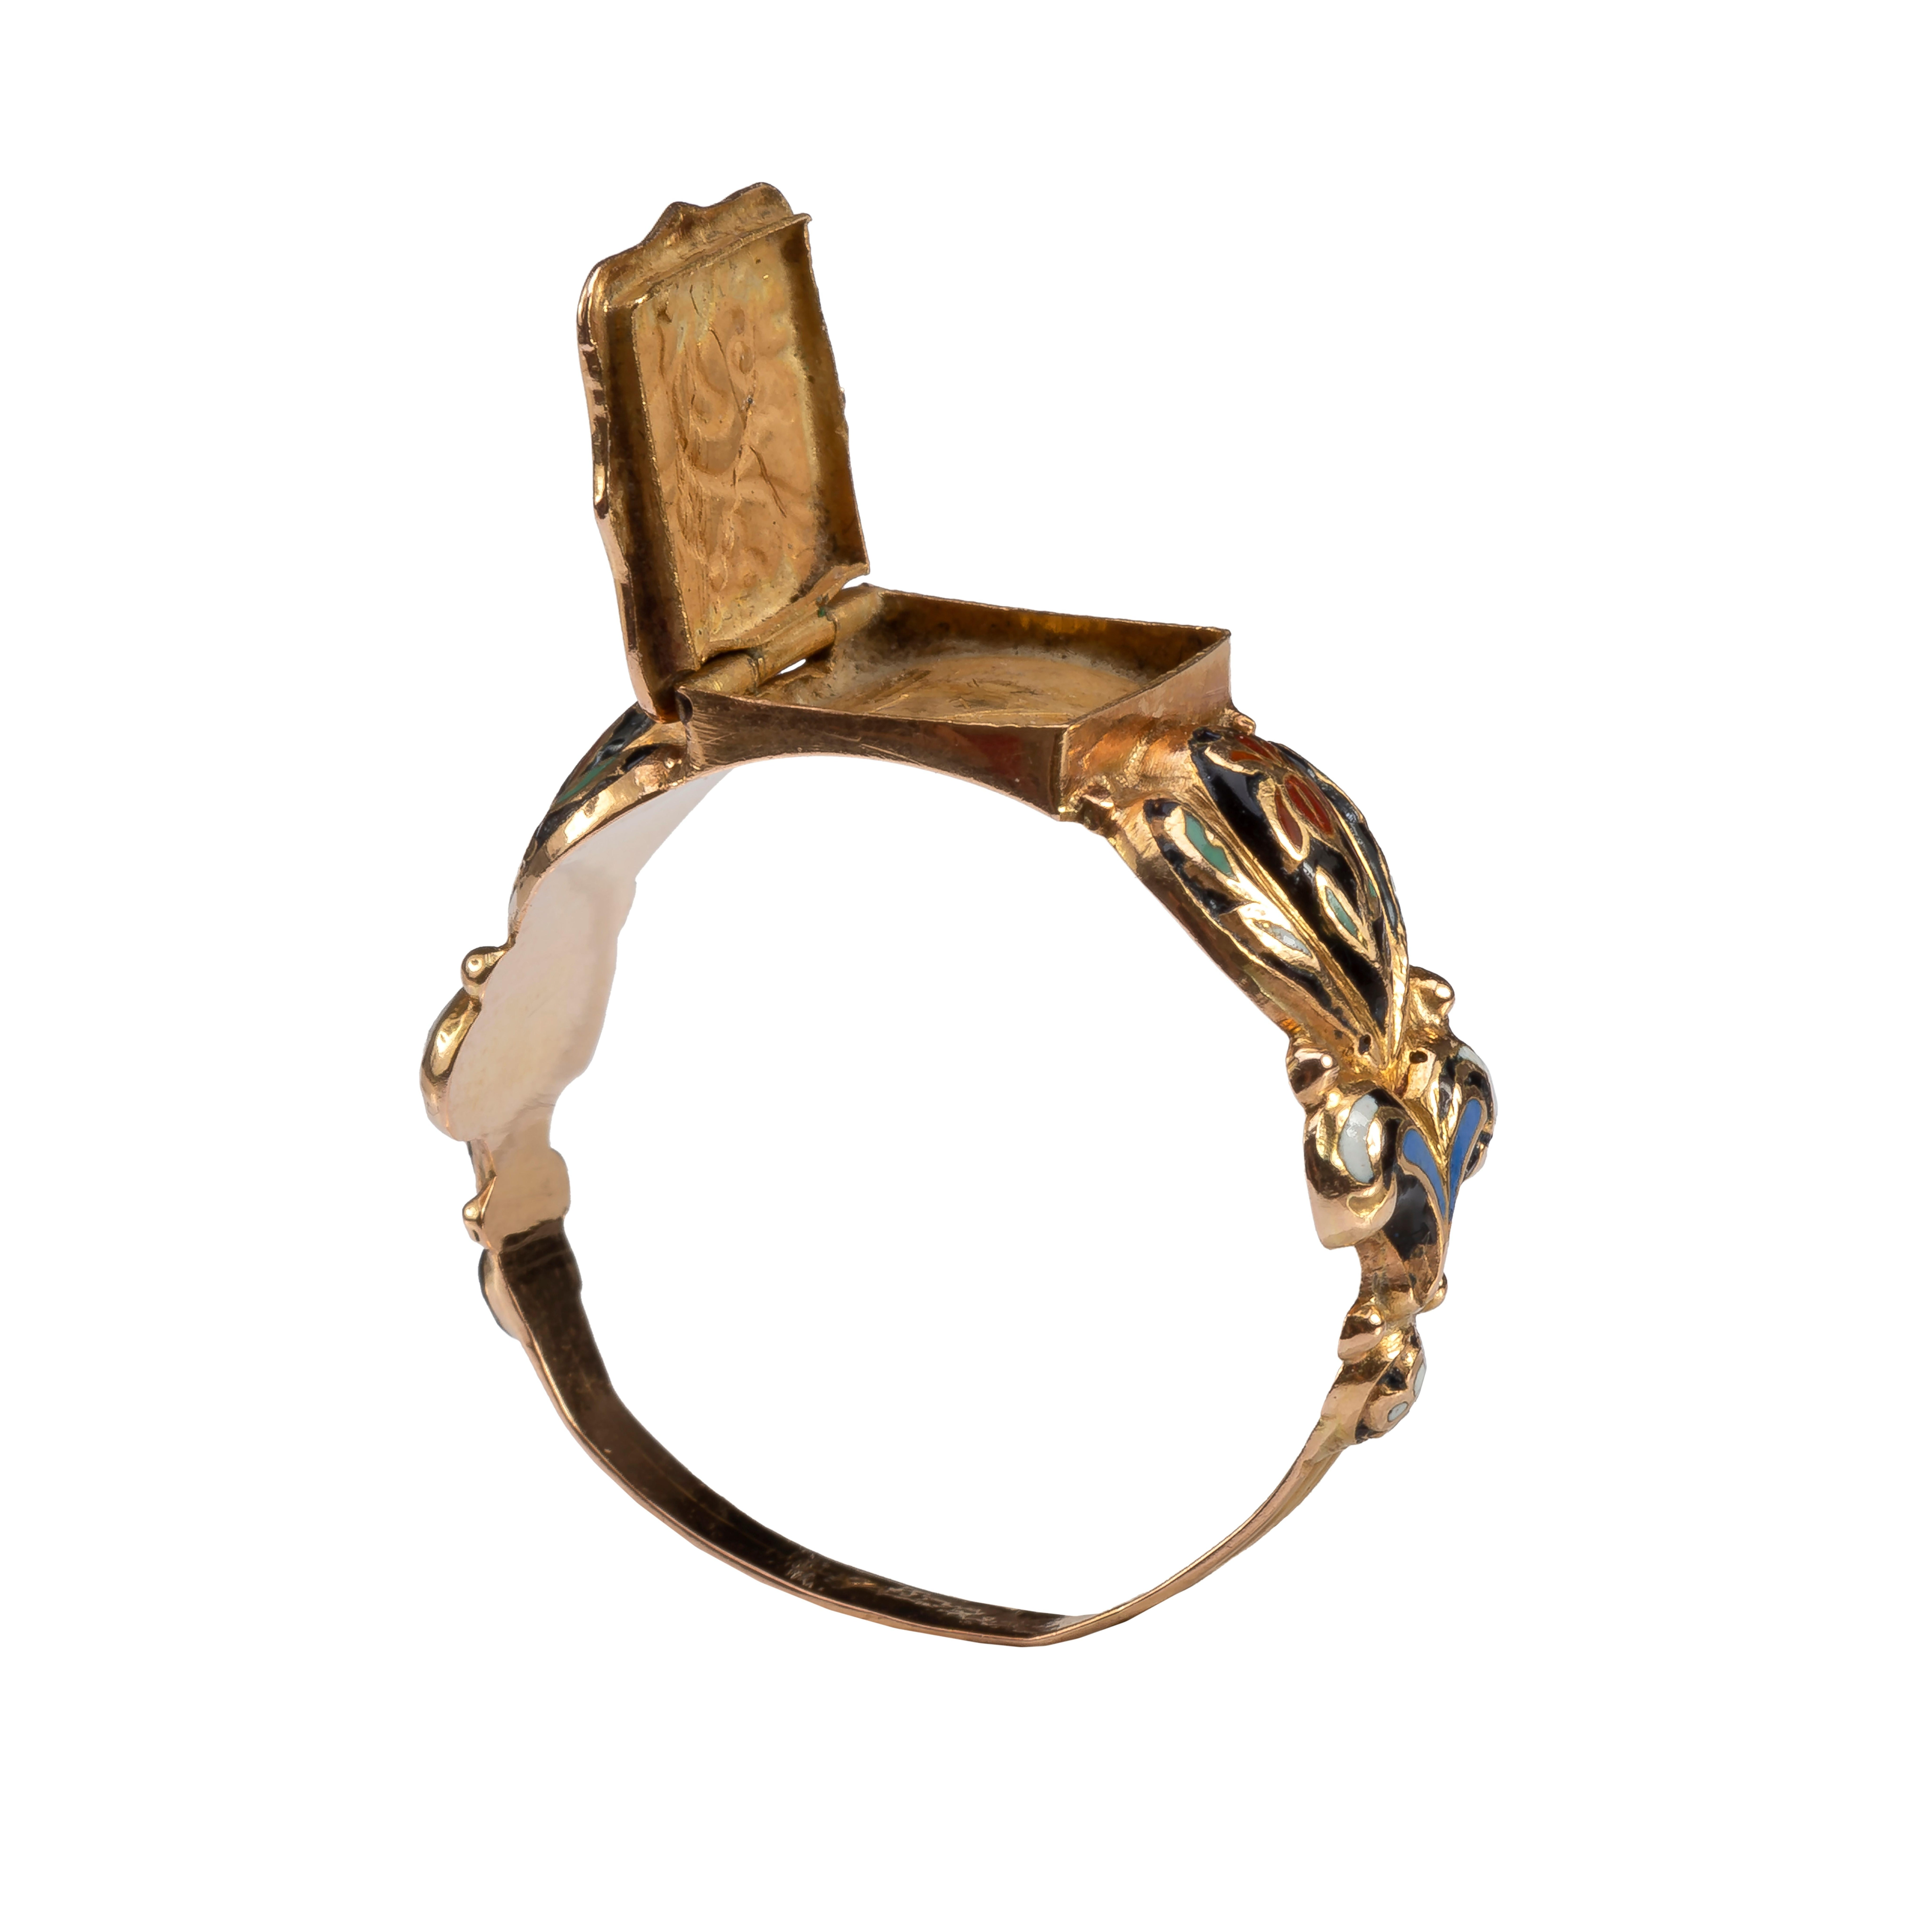 Early 19th-Century Enameled Gold Ring with Flowers and Concealed Compartment 1